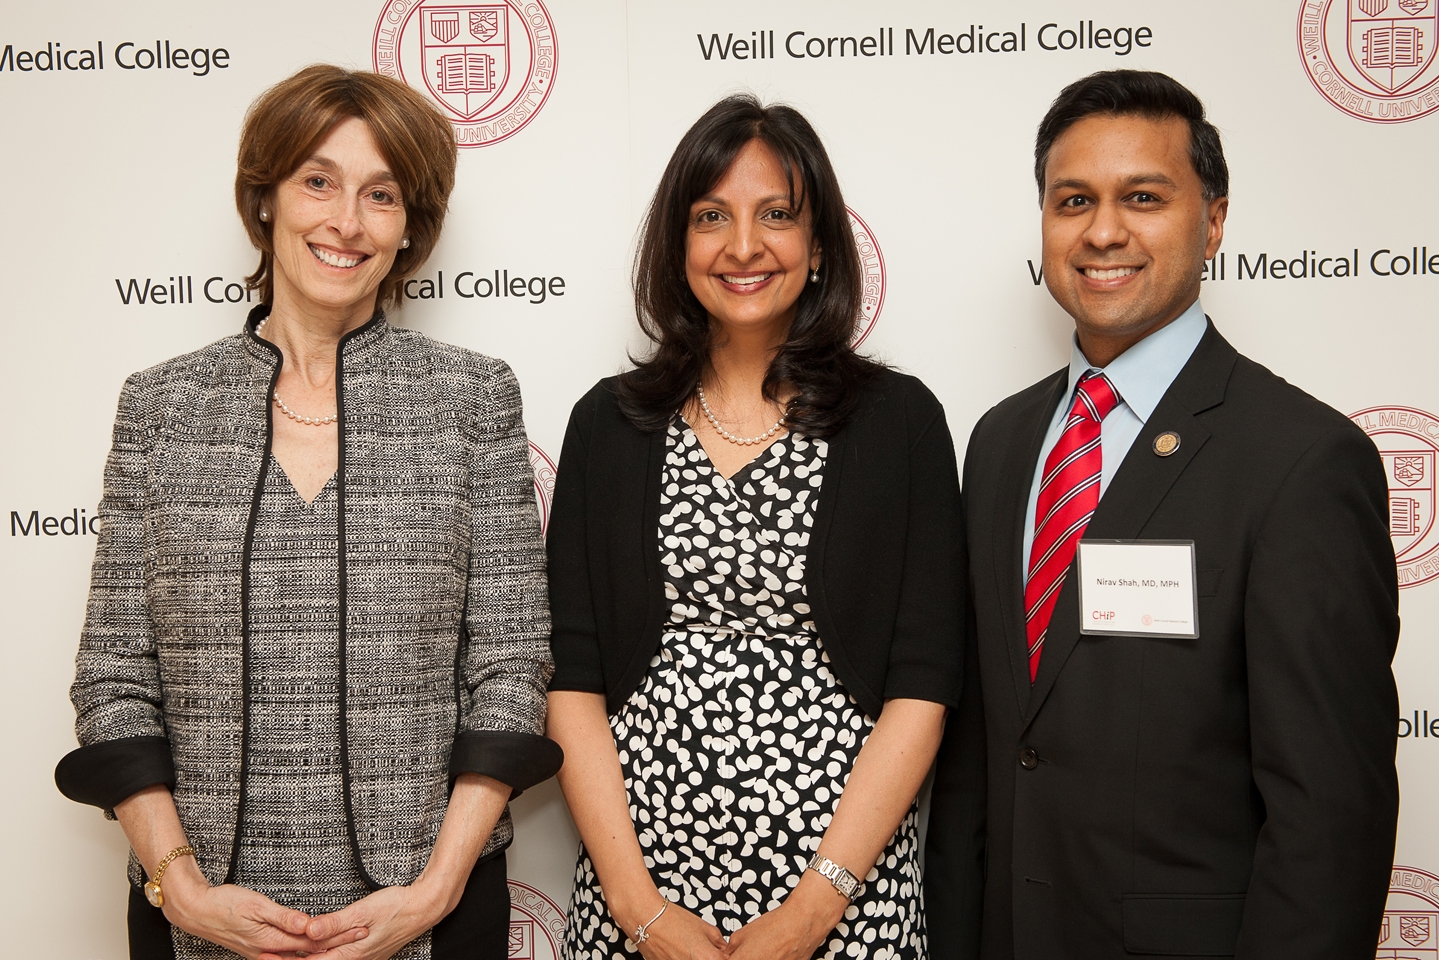 Dr. Laurie H. Glimcher, the Stephen and Suzanne Weiss Dean of Weill Cornell Medical College, left, Dr. Rainu Kaushal, executive director of the Center for Healthcare Informatics and Policy and New York Commissioner of Health Dr. Nirav R. Shah at an event 